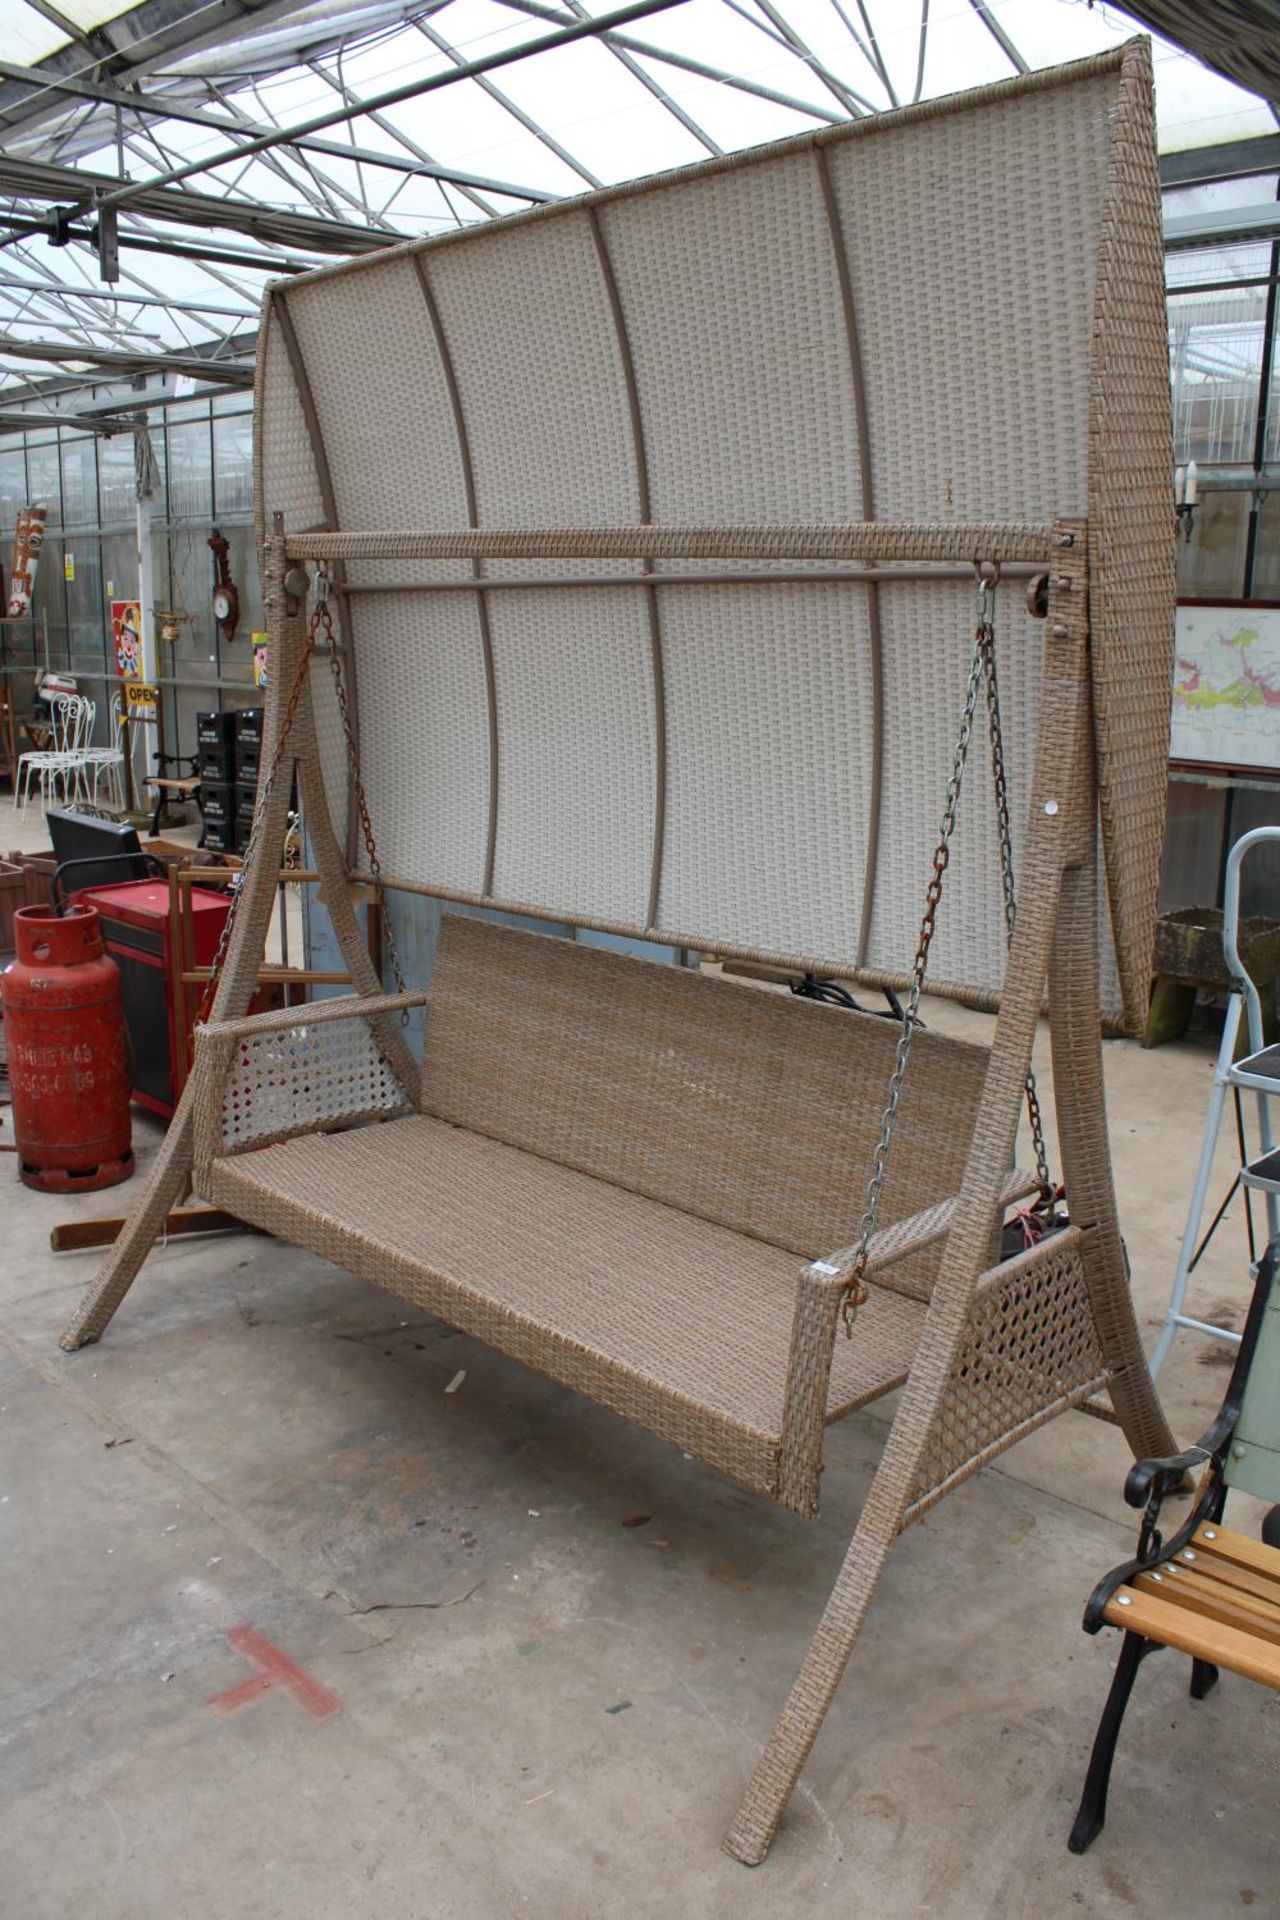 A LARGE THREE SEATER RATTAN SWING SEAT WITH CANOPY